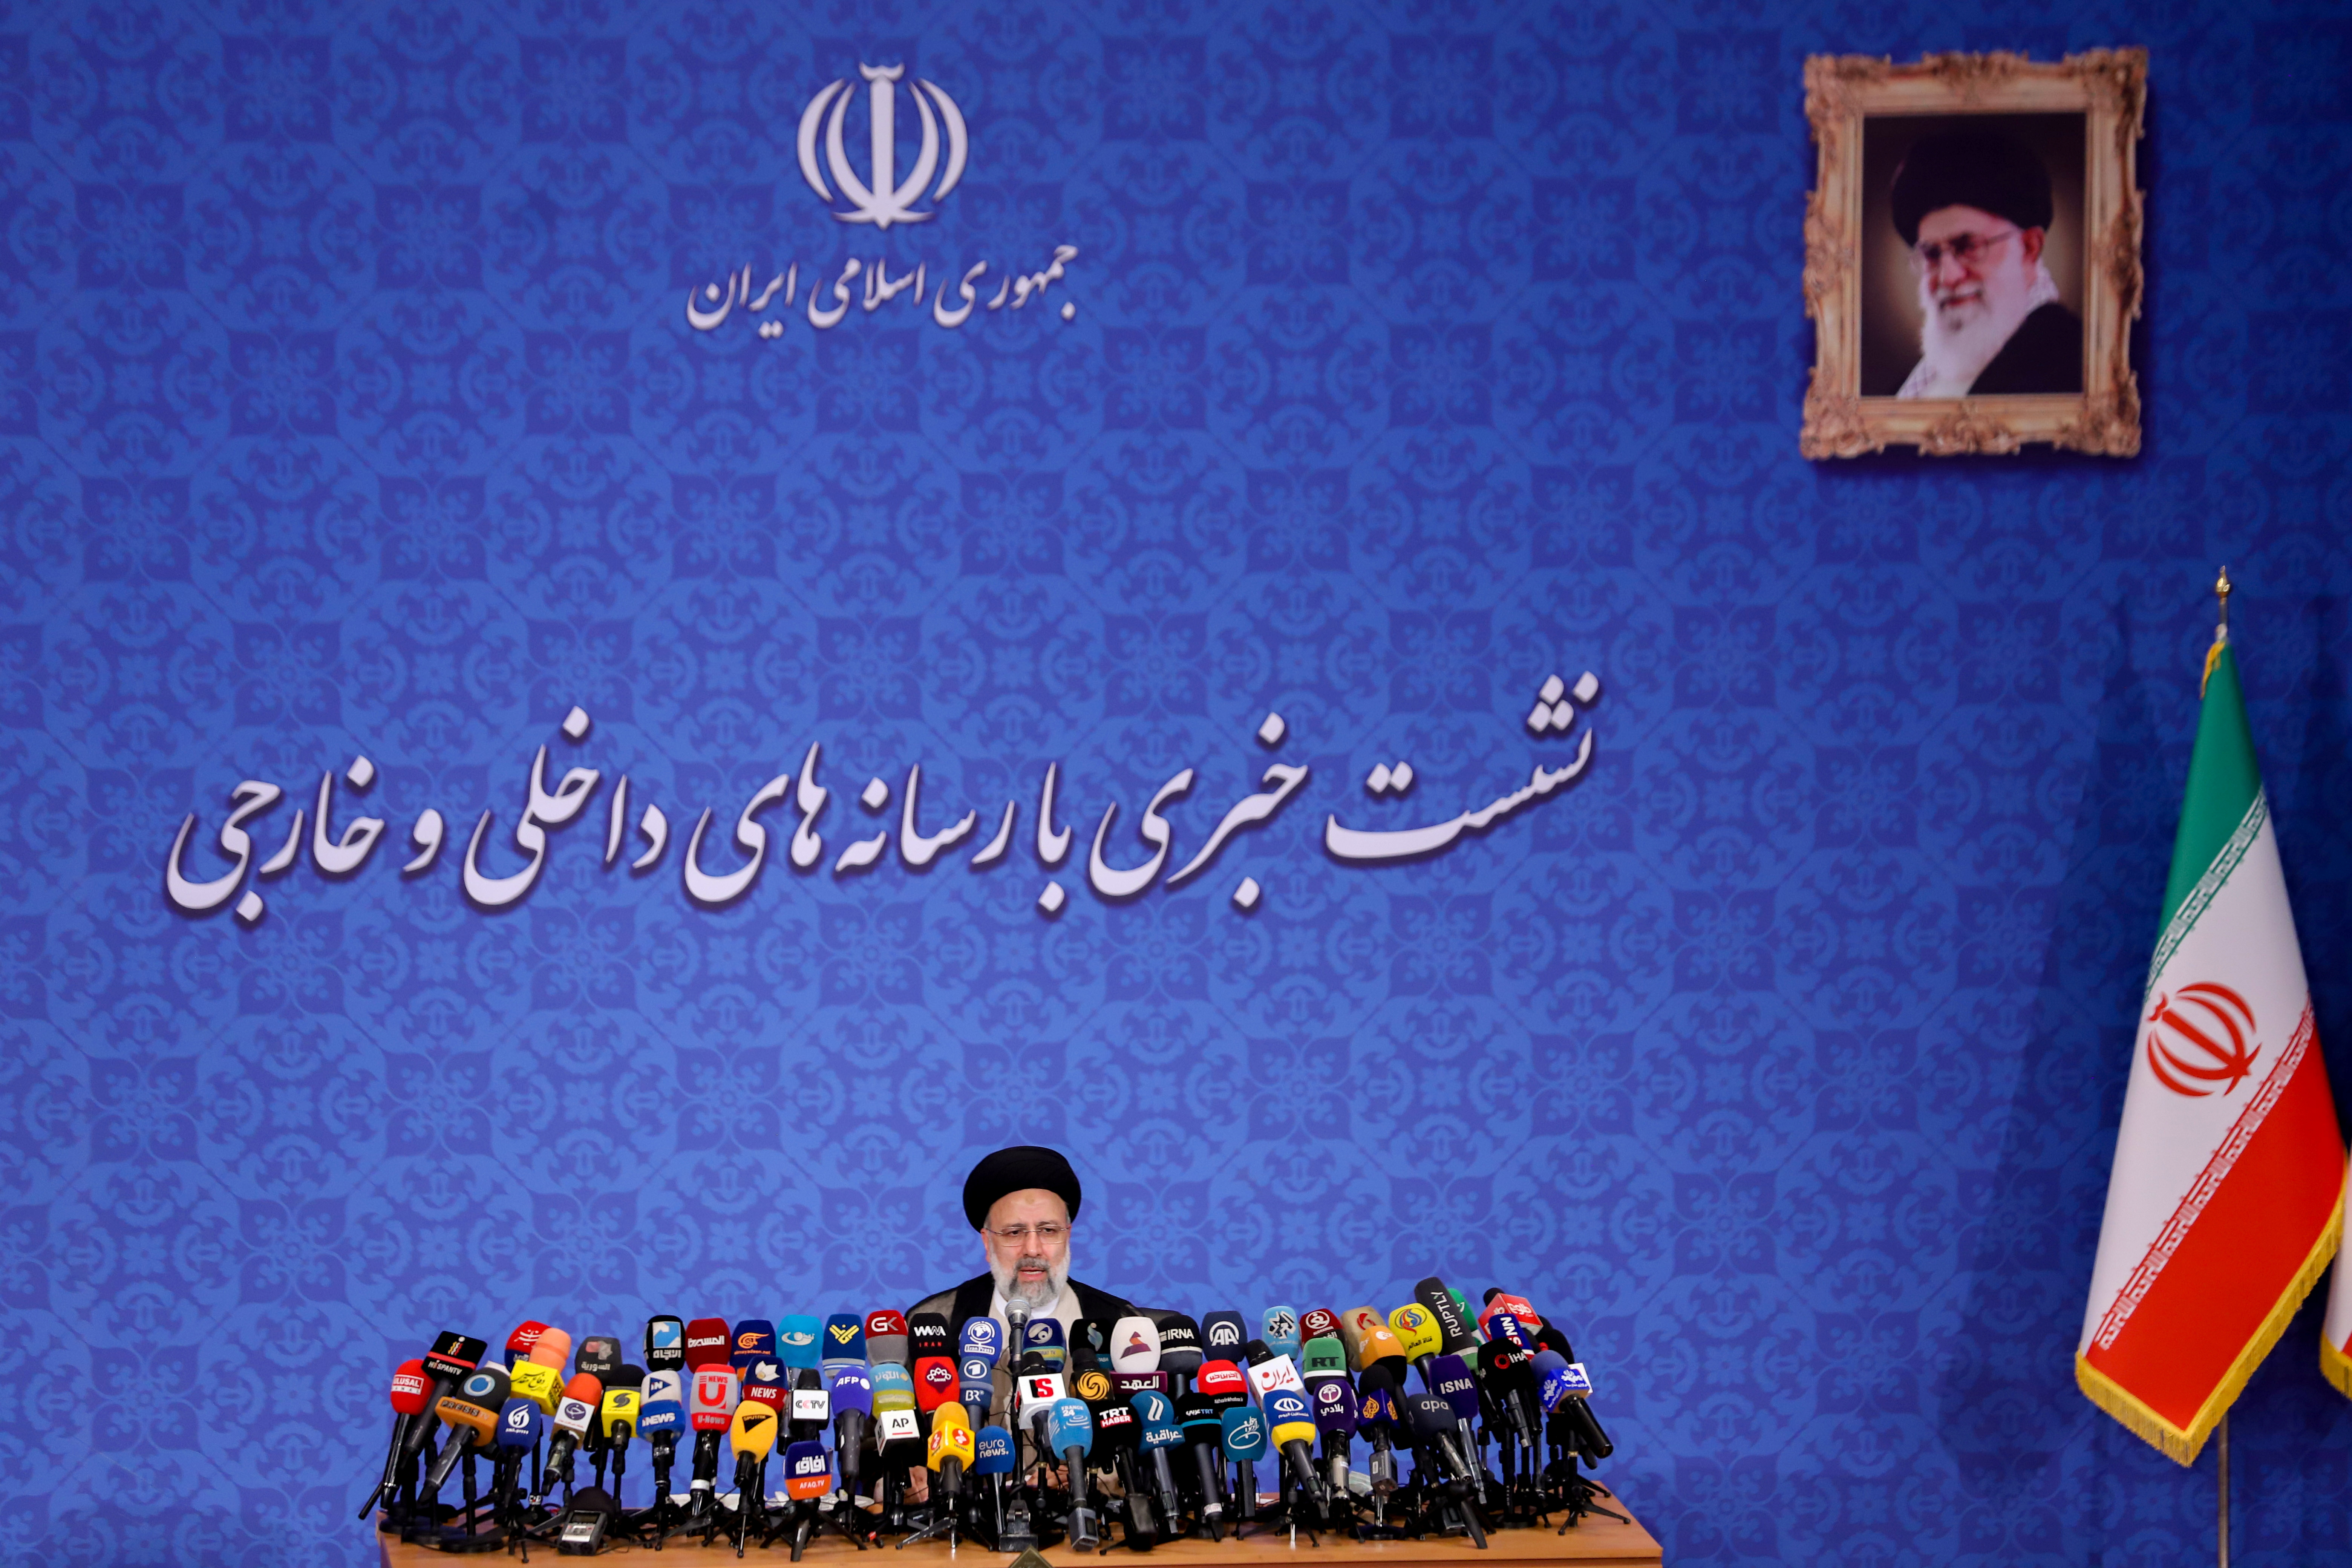 Iran's President-elect Ebrahim Raisi speaks during a news conference in Tehran